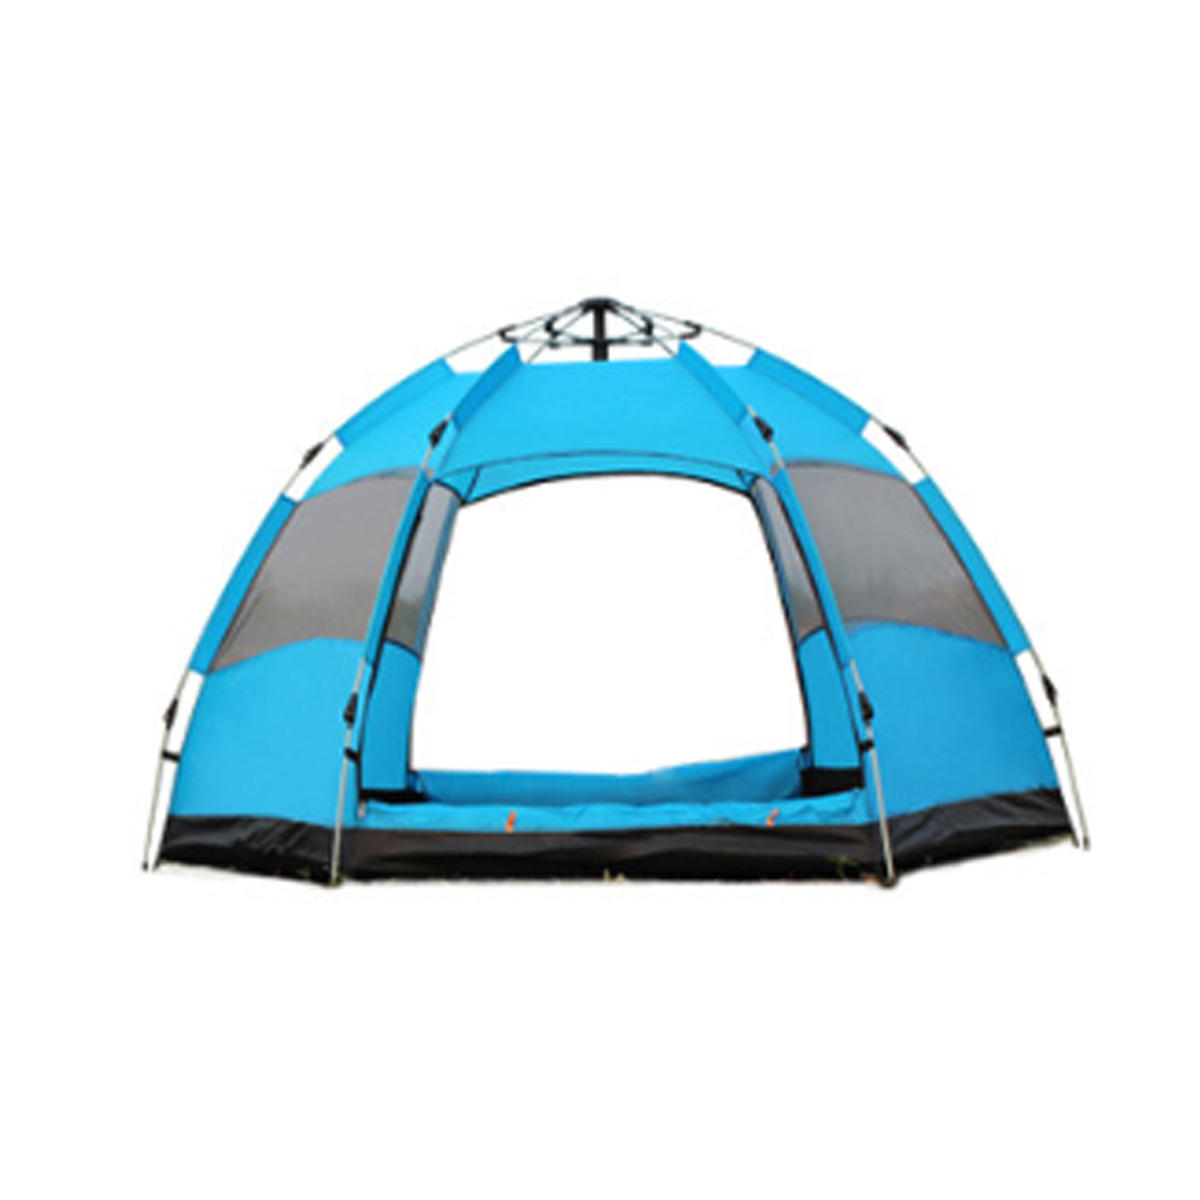 3-5 Person Fully Automatic Tent Waterproof Quick Open Tent Outdoor Family Camping Hiking Fishing Tent Sunshade-Orange/Green/Blue